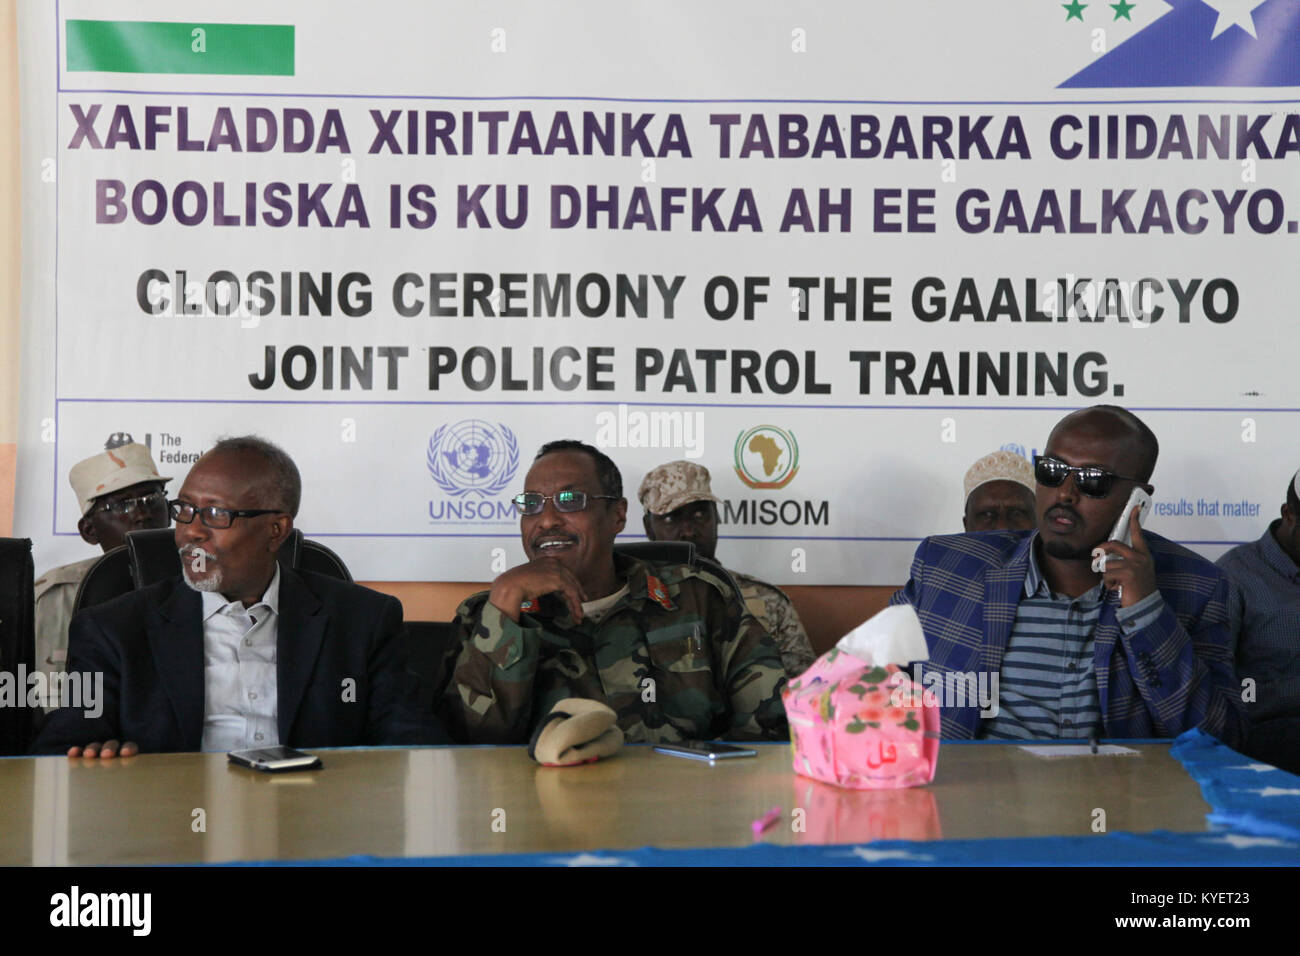 From left to right,  Sa'ed Siyad, Minister of Finance for Galmudug State, General Abdillahi Irro, Commander of 21st Division of the Somali National Army (SNA) in Puntland State and Abdirashid  Arte, the Governor of Gaalkacyo South attend the closing ceremony of a Joint Police Patrol Training conducted by AMISOM and UN Officers in Gaalkacyo, Somalia on December 19, 2017. AMISOM Photo Stock Photo